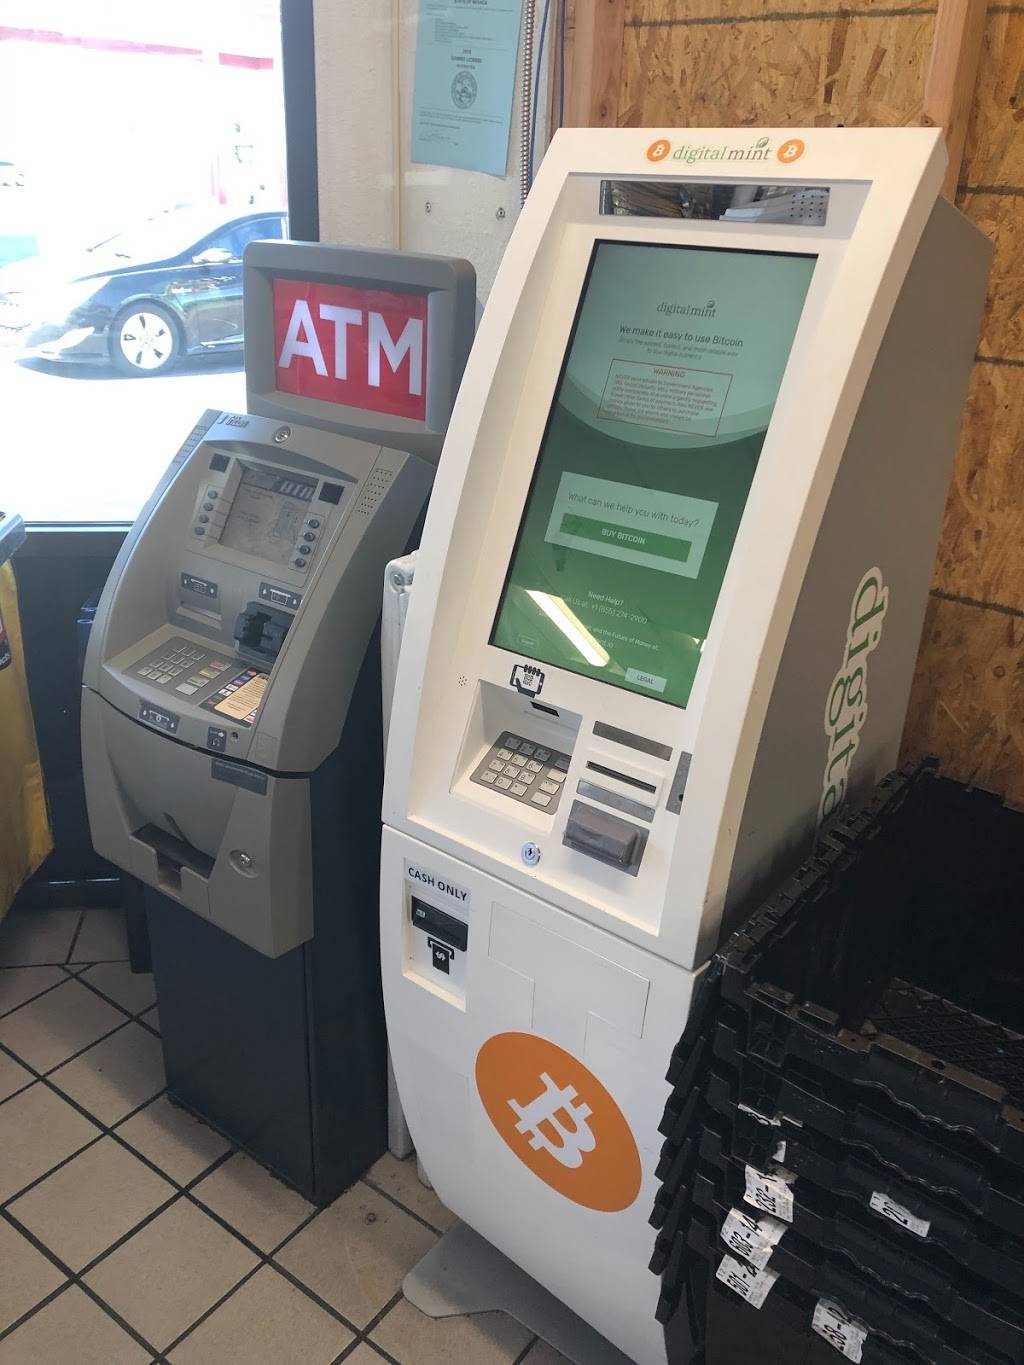 Digitalmint Bitcoin Atm Digitalmint To Setup More Bitcoin Atm Locations To Exploit Increased 8249